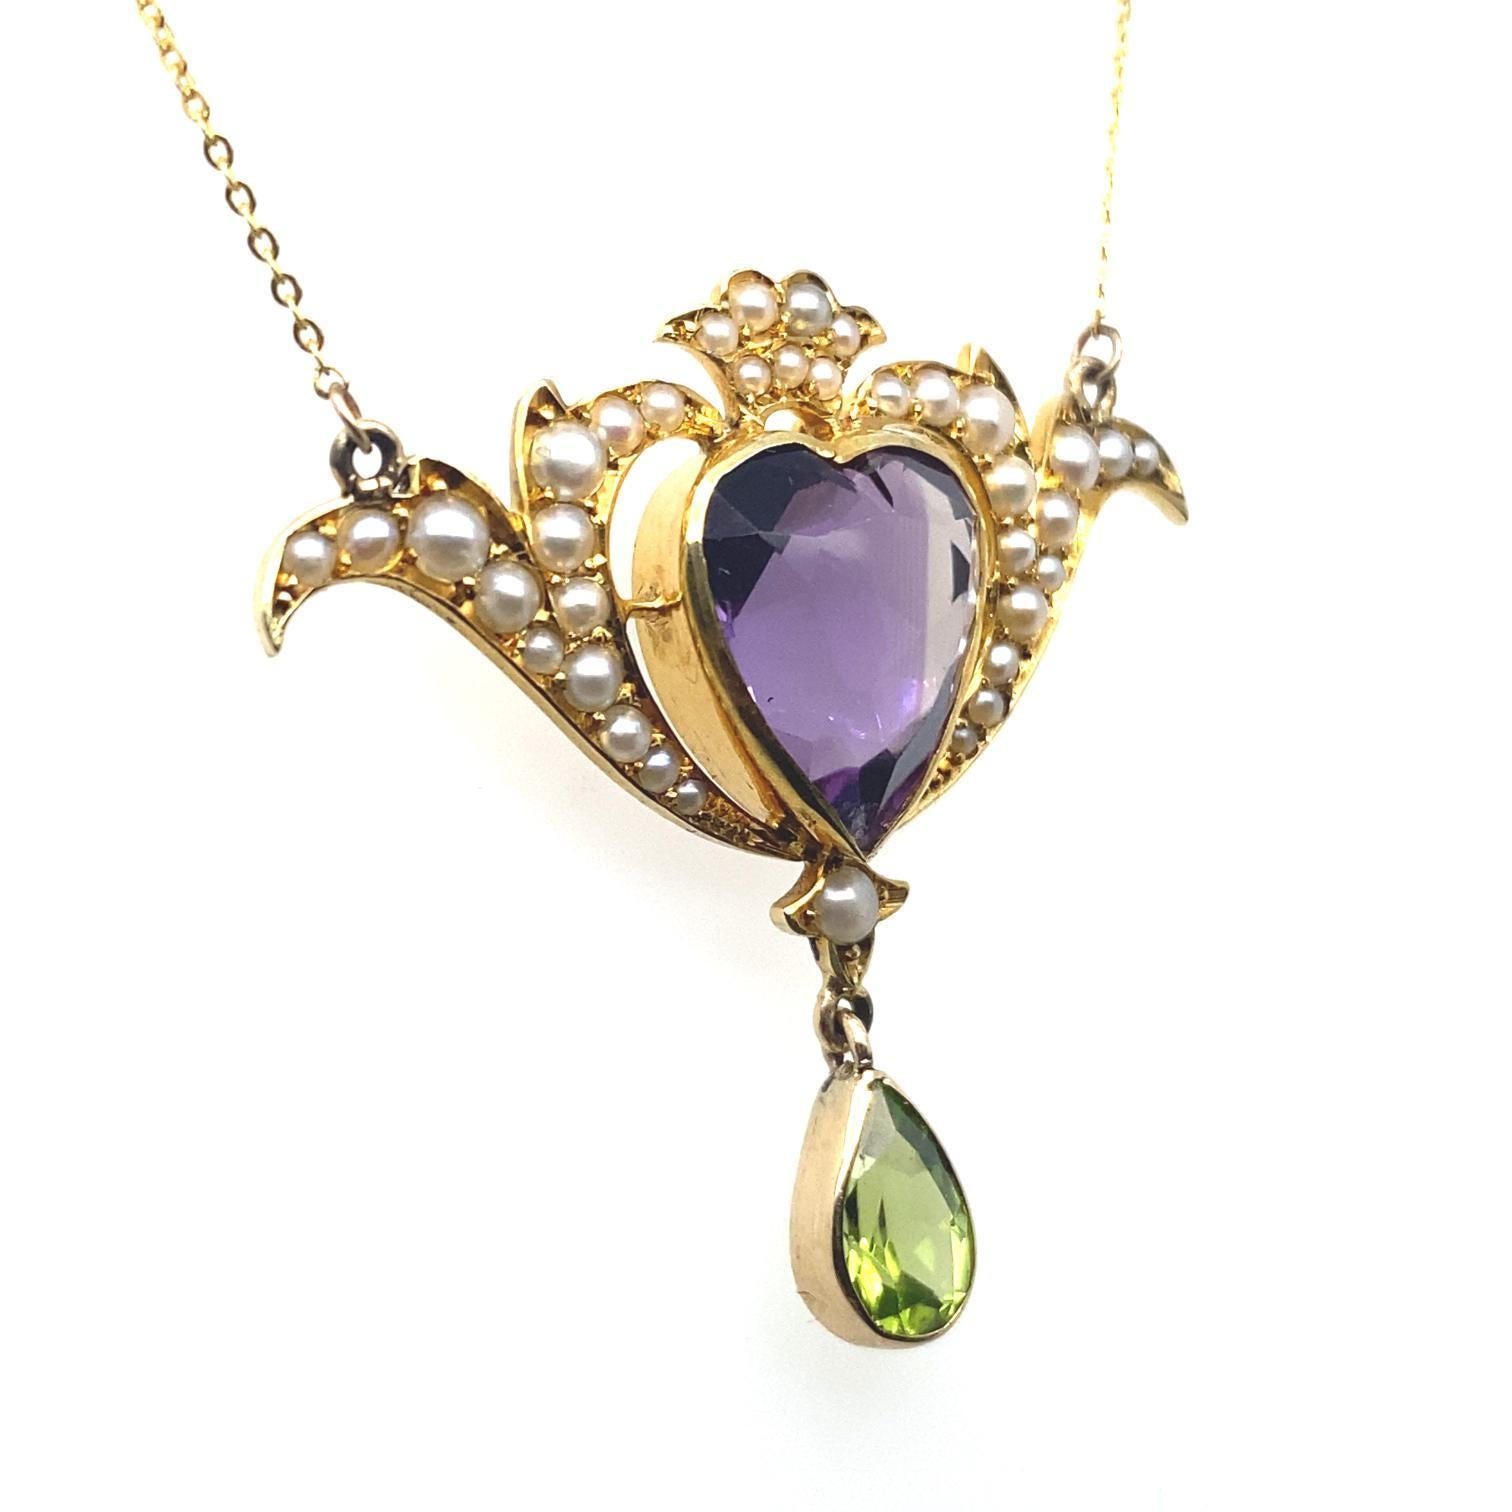 A Murrle Bennett & Co Art Nouveau amethyst and pearl yellow gold heart necklace.

A finely crafted 15 carat yellow gold pendant of swirling form, set to its centre with a heart shaped amethyst of 4 carats approximately of deep purple colour, with a